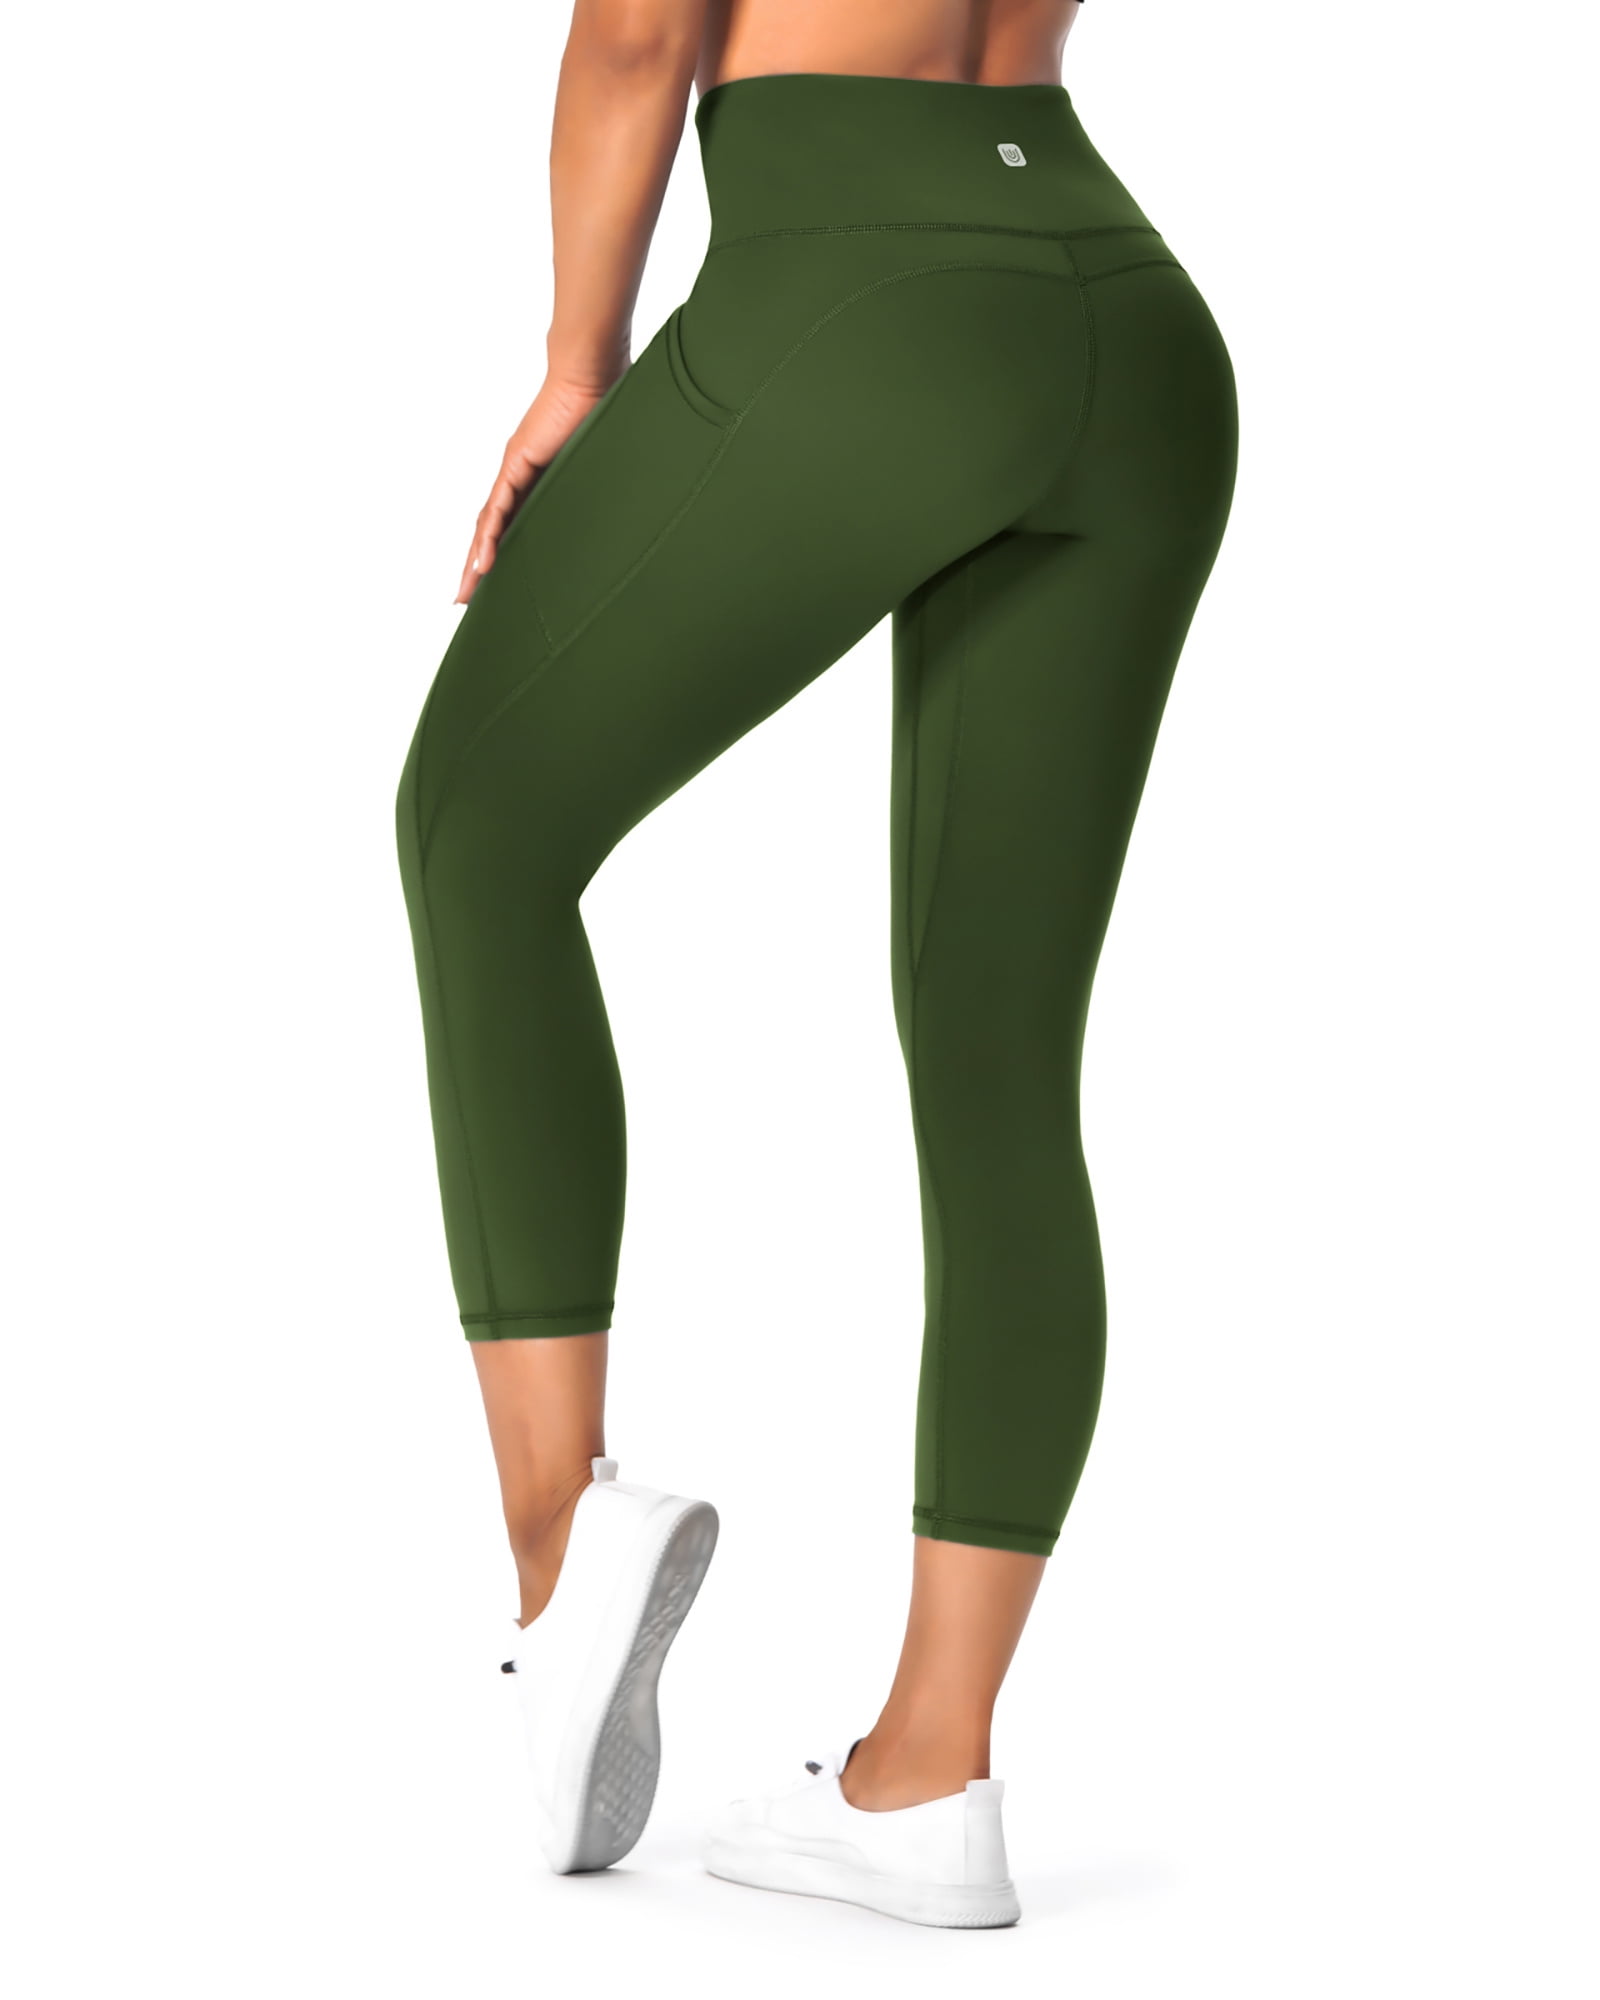 UUE 21 Inseam Olive Workout Leggings for Women,Yoga Capris with Pockets  Tummy Control, Butt Lifting Leggings for women workout